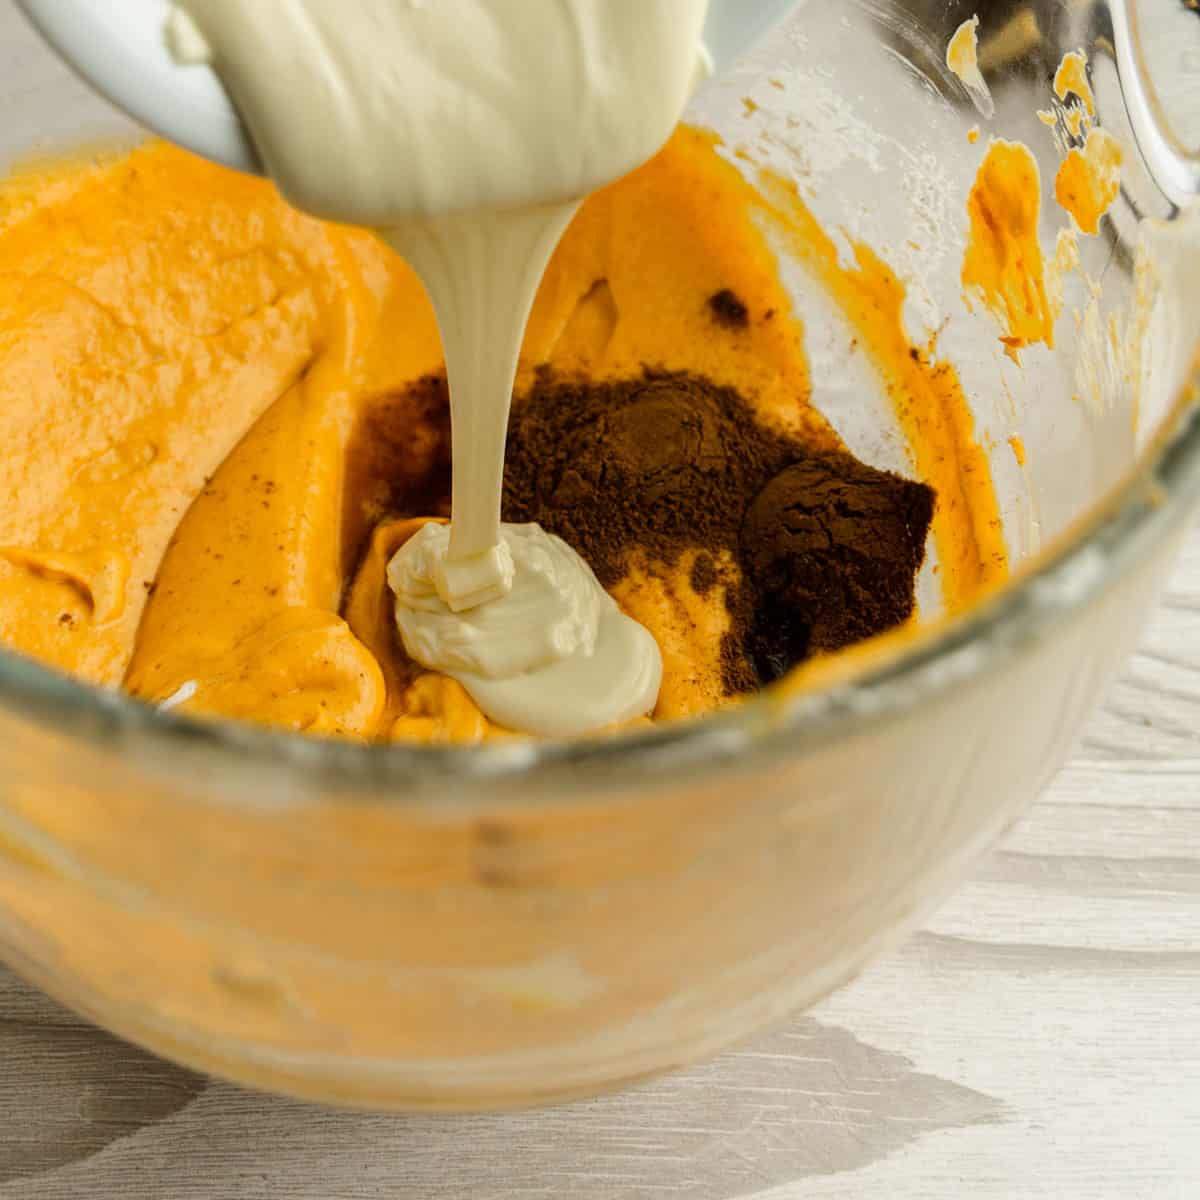 Pouring white chocolate in the bowl with pumpkin, cream cheese and spices.